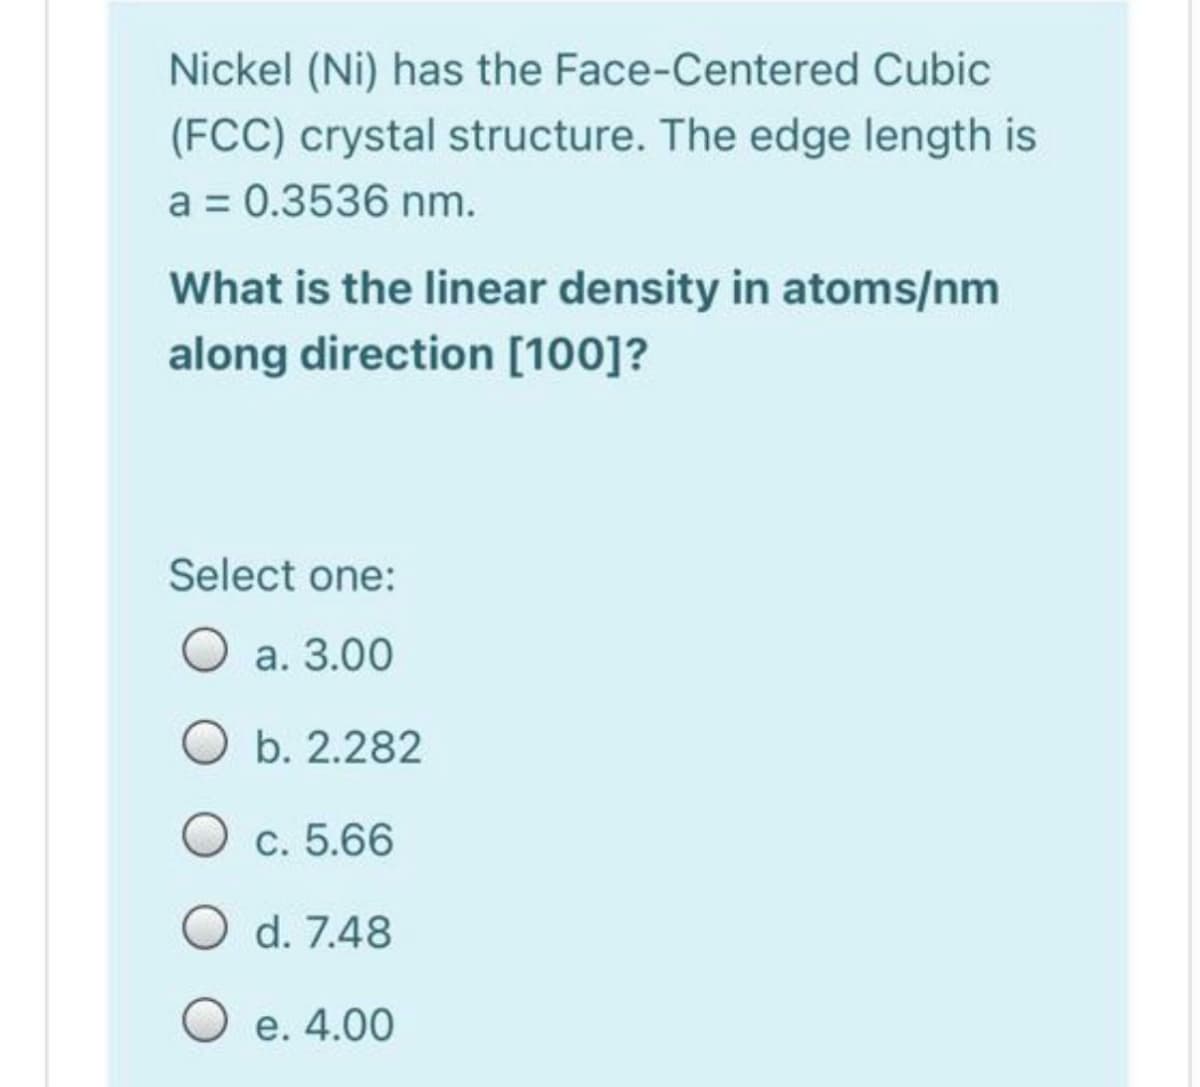 Nickel (Ni) has the Face-Centered Cubic
(FCC) crystal structure. The edge length is
a = 0.3536 nm.
What is the linear density in atoms/nm
along direction [100]?
Select one:
O a. 3.00
b. 2.282
c. 5.66
O d. 7.48
O e. 4.00
